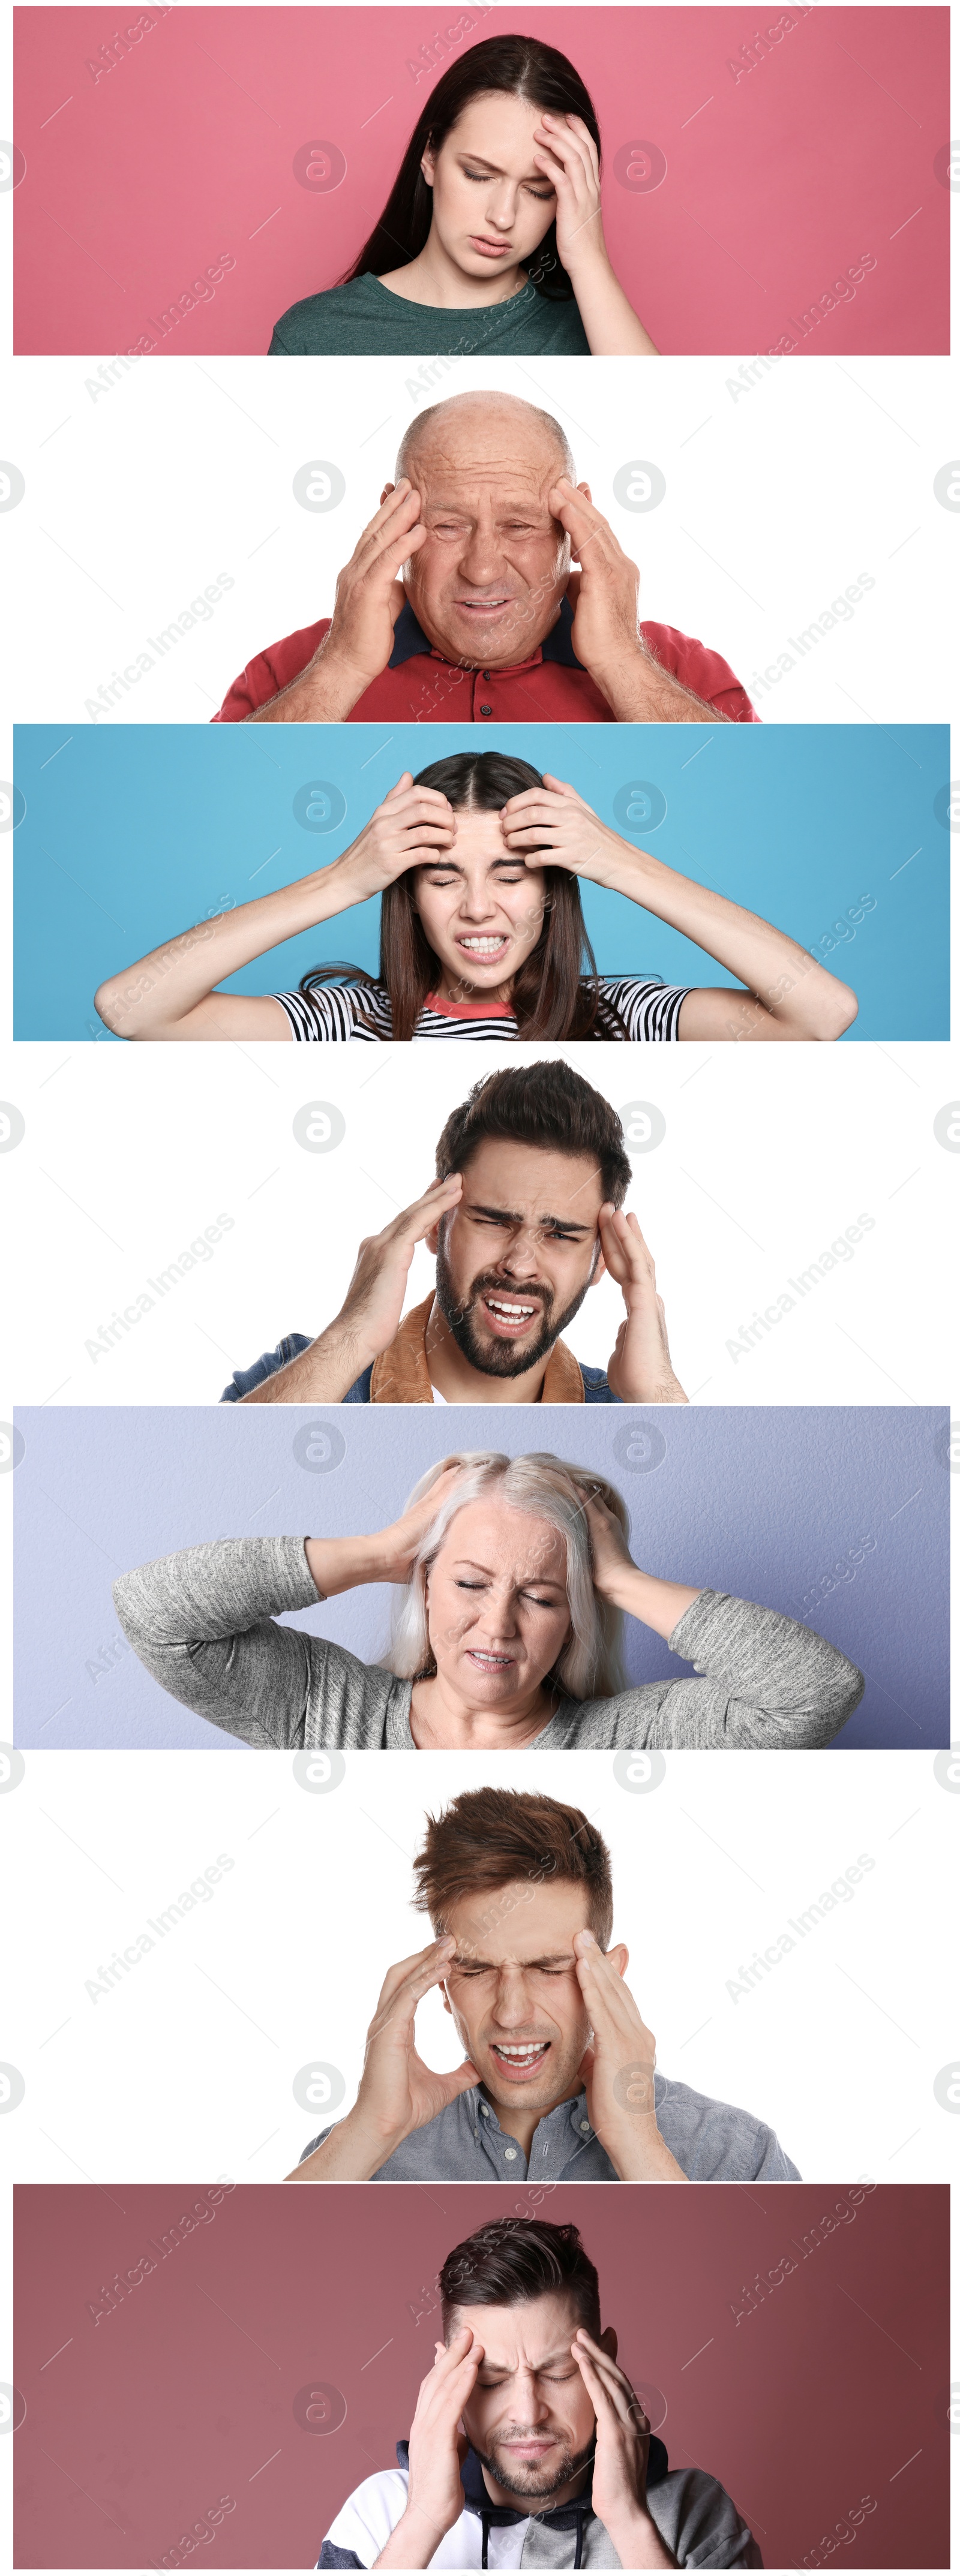 Image of Collage with stressed people on different color backgrounds